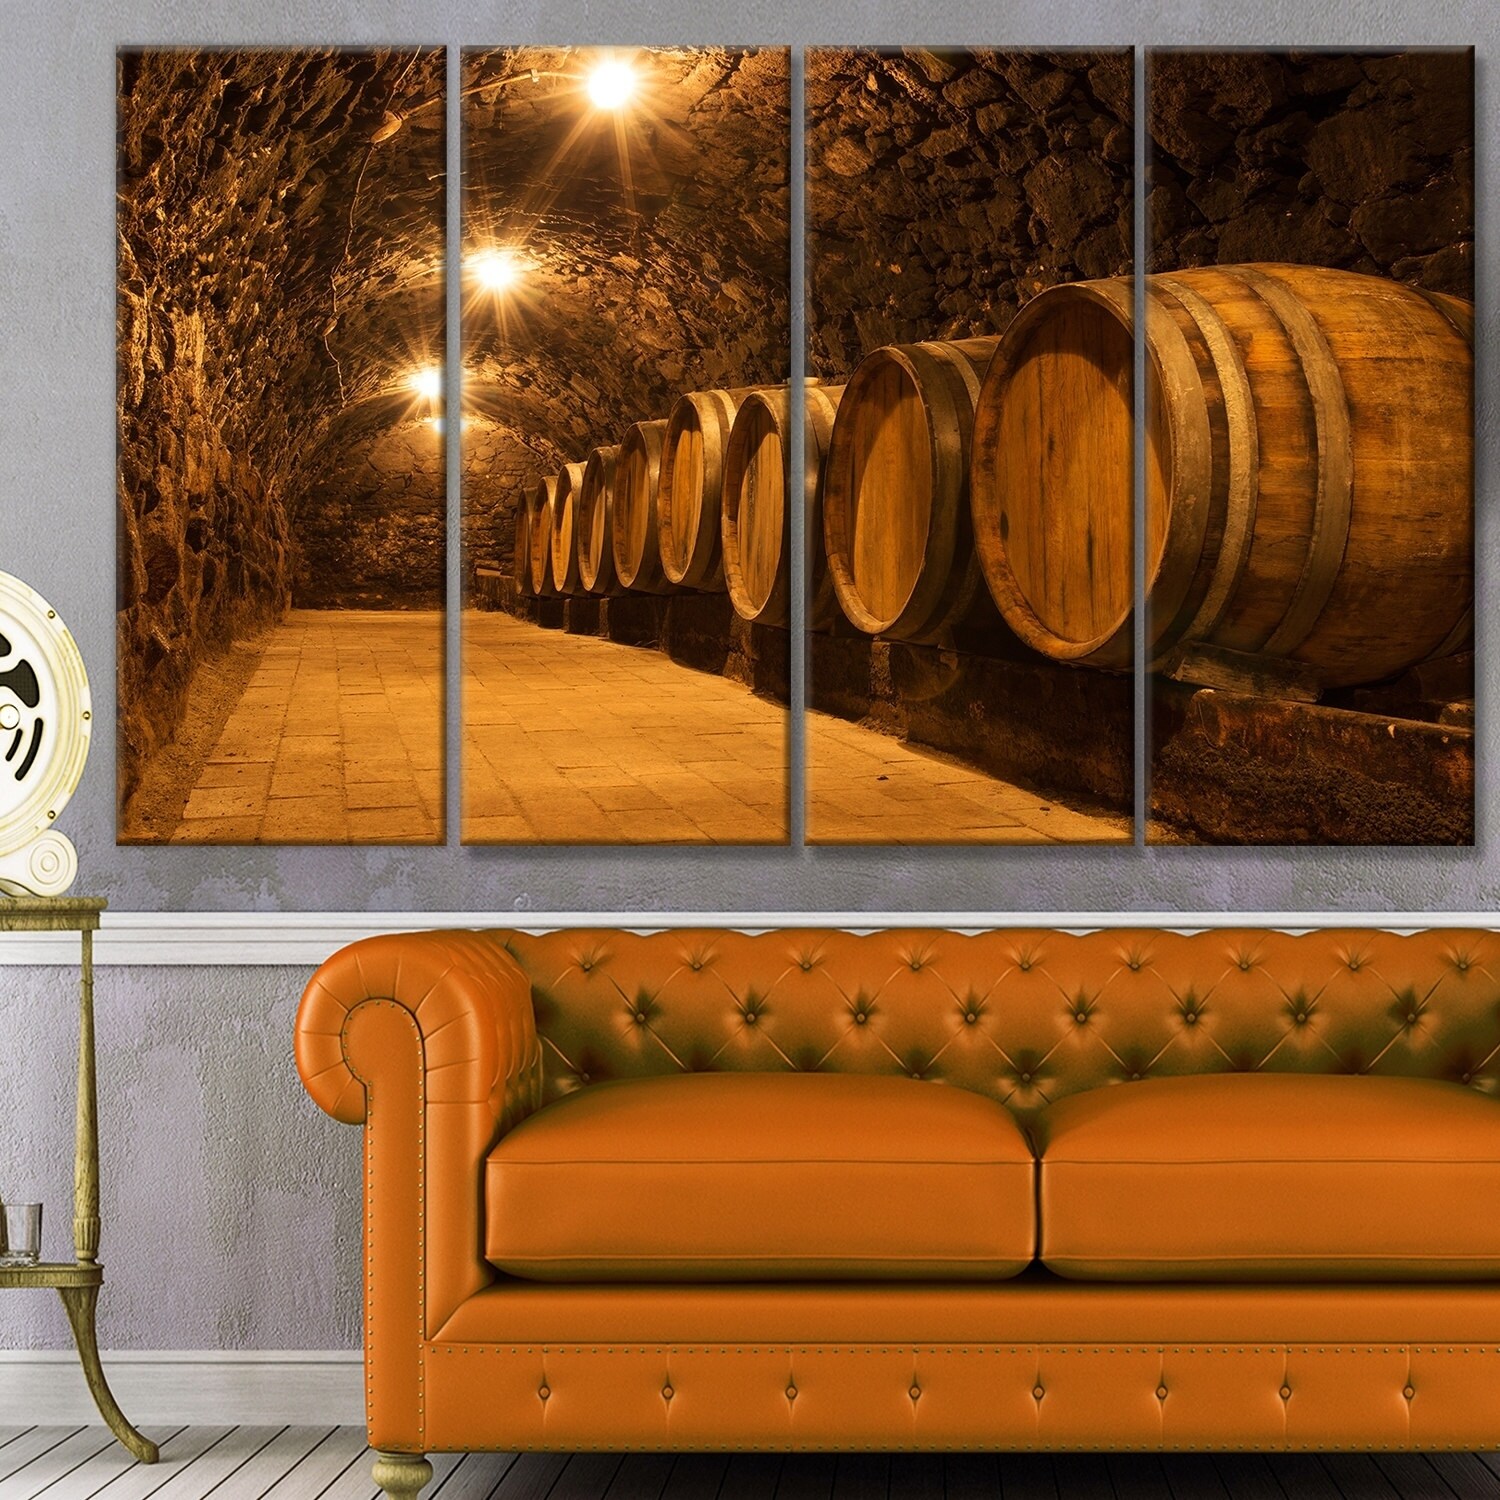 80 x 68 Designart TAP15215-80-68  Oak Barrels in The Tunnel Landscape Blanket Décor Art for Home and Office Wall Tapestry x Large 